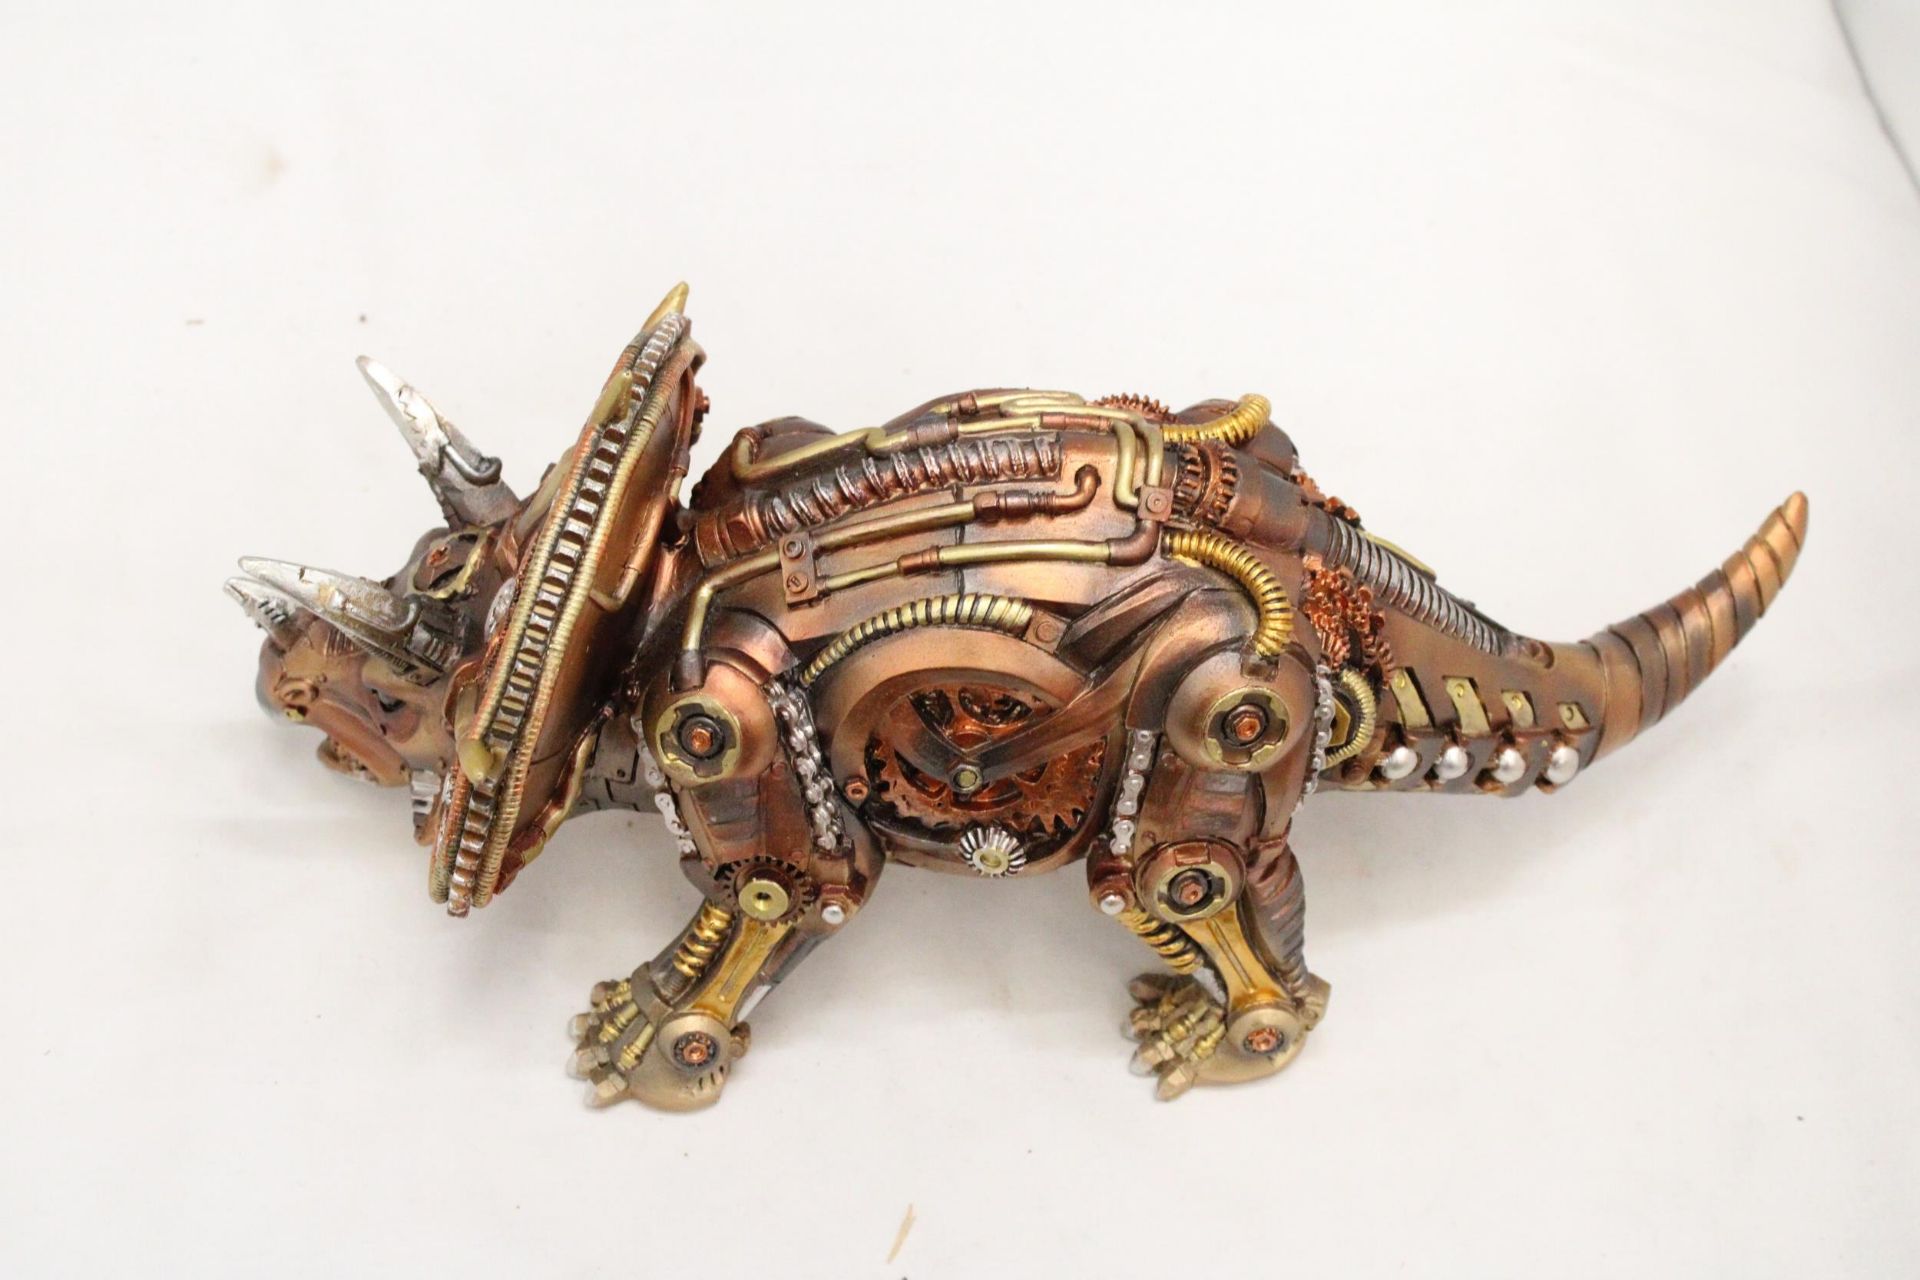 A MECHANICAL STYLE TRICERATOPS - Image 5 of 5